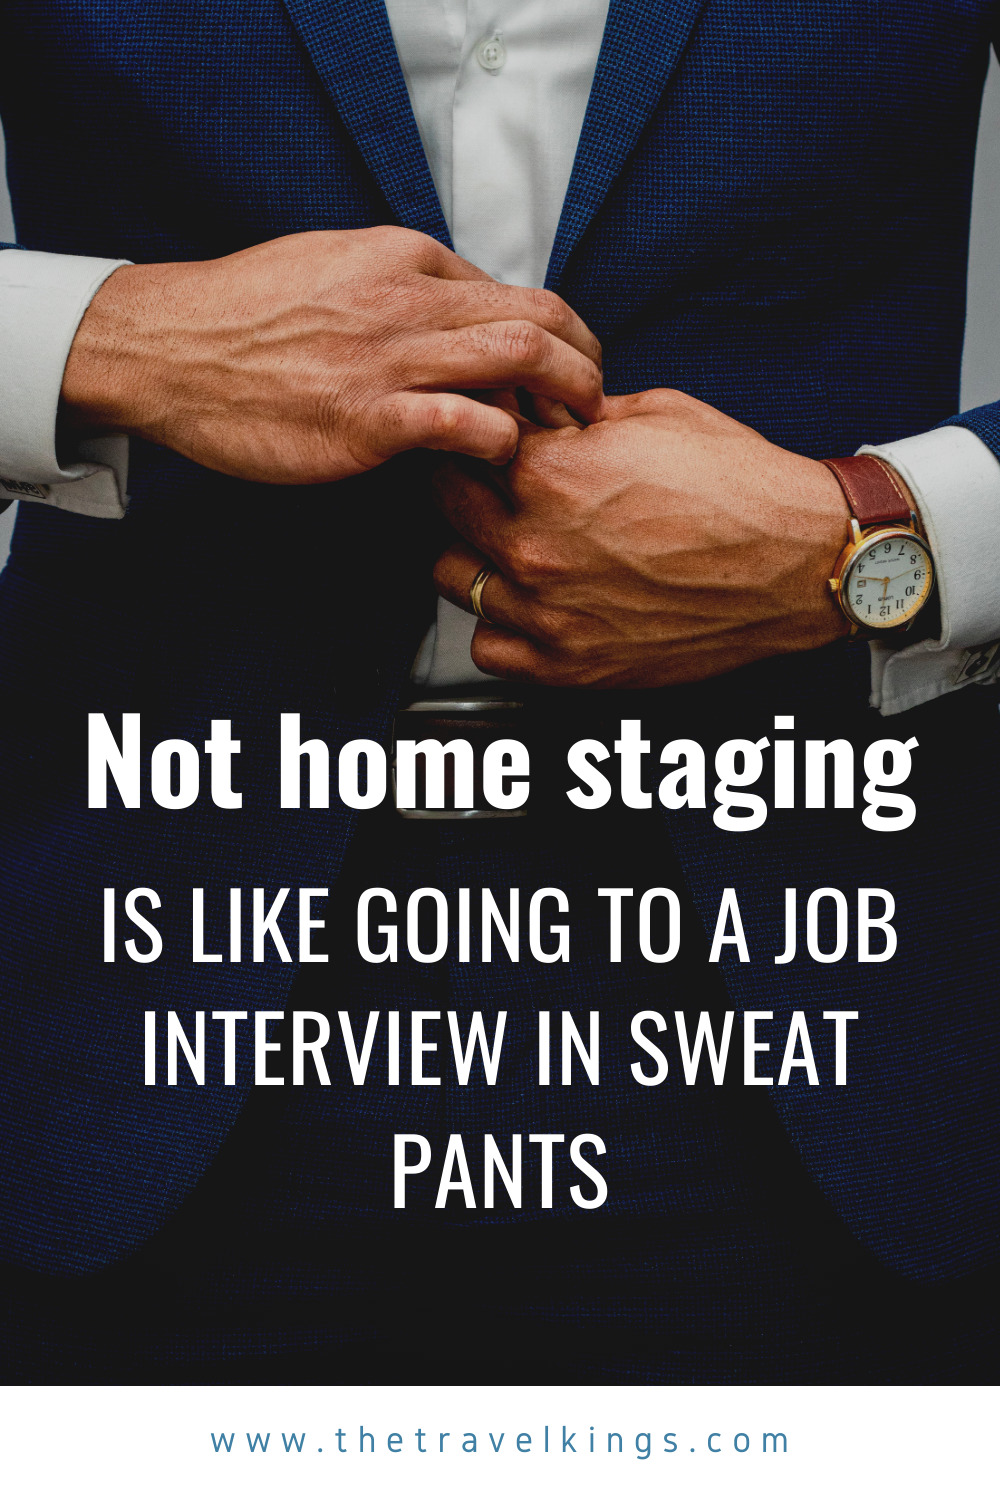 Not Home Staging is like Going to a Job Interview in Sweatpants